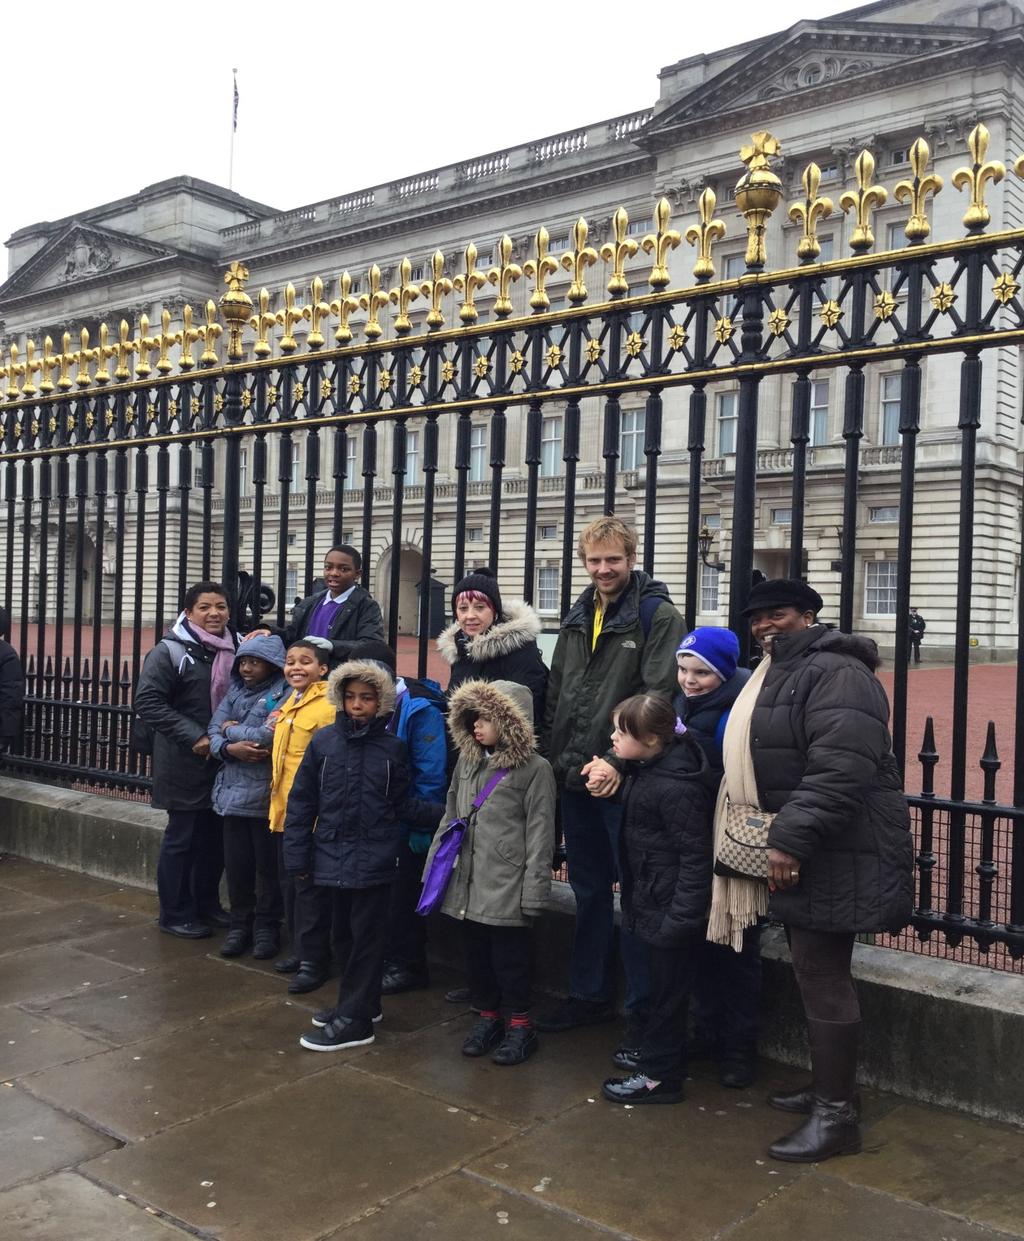 Issue 18 03 February 2017 Lions Class On Tuesday the Lions class went to Central London by